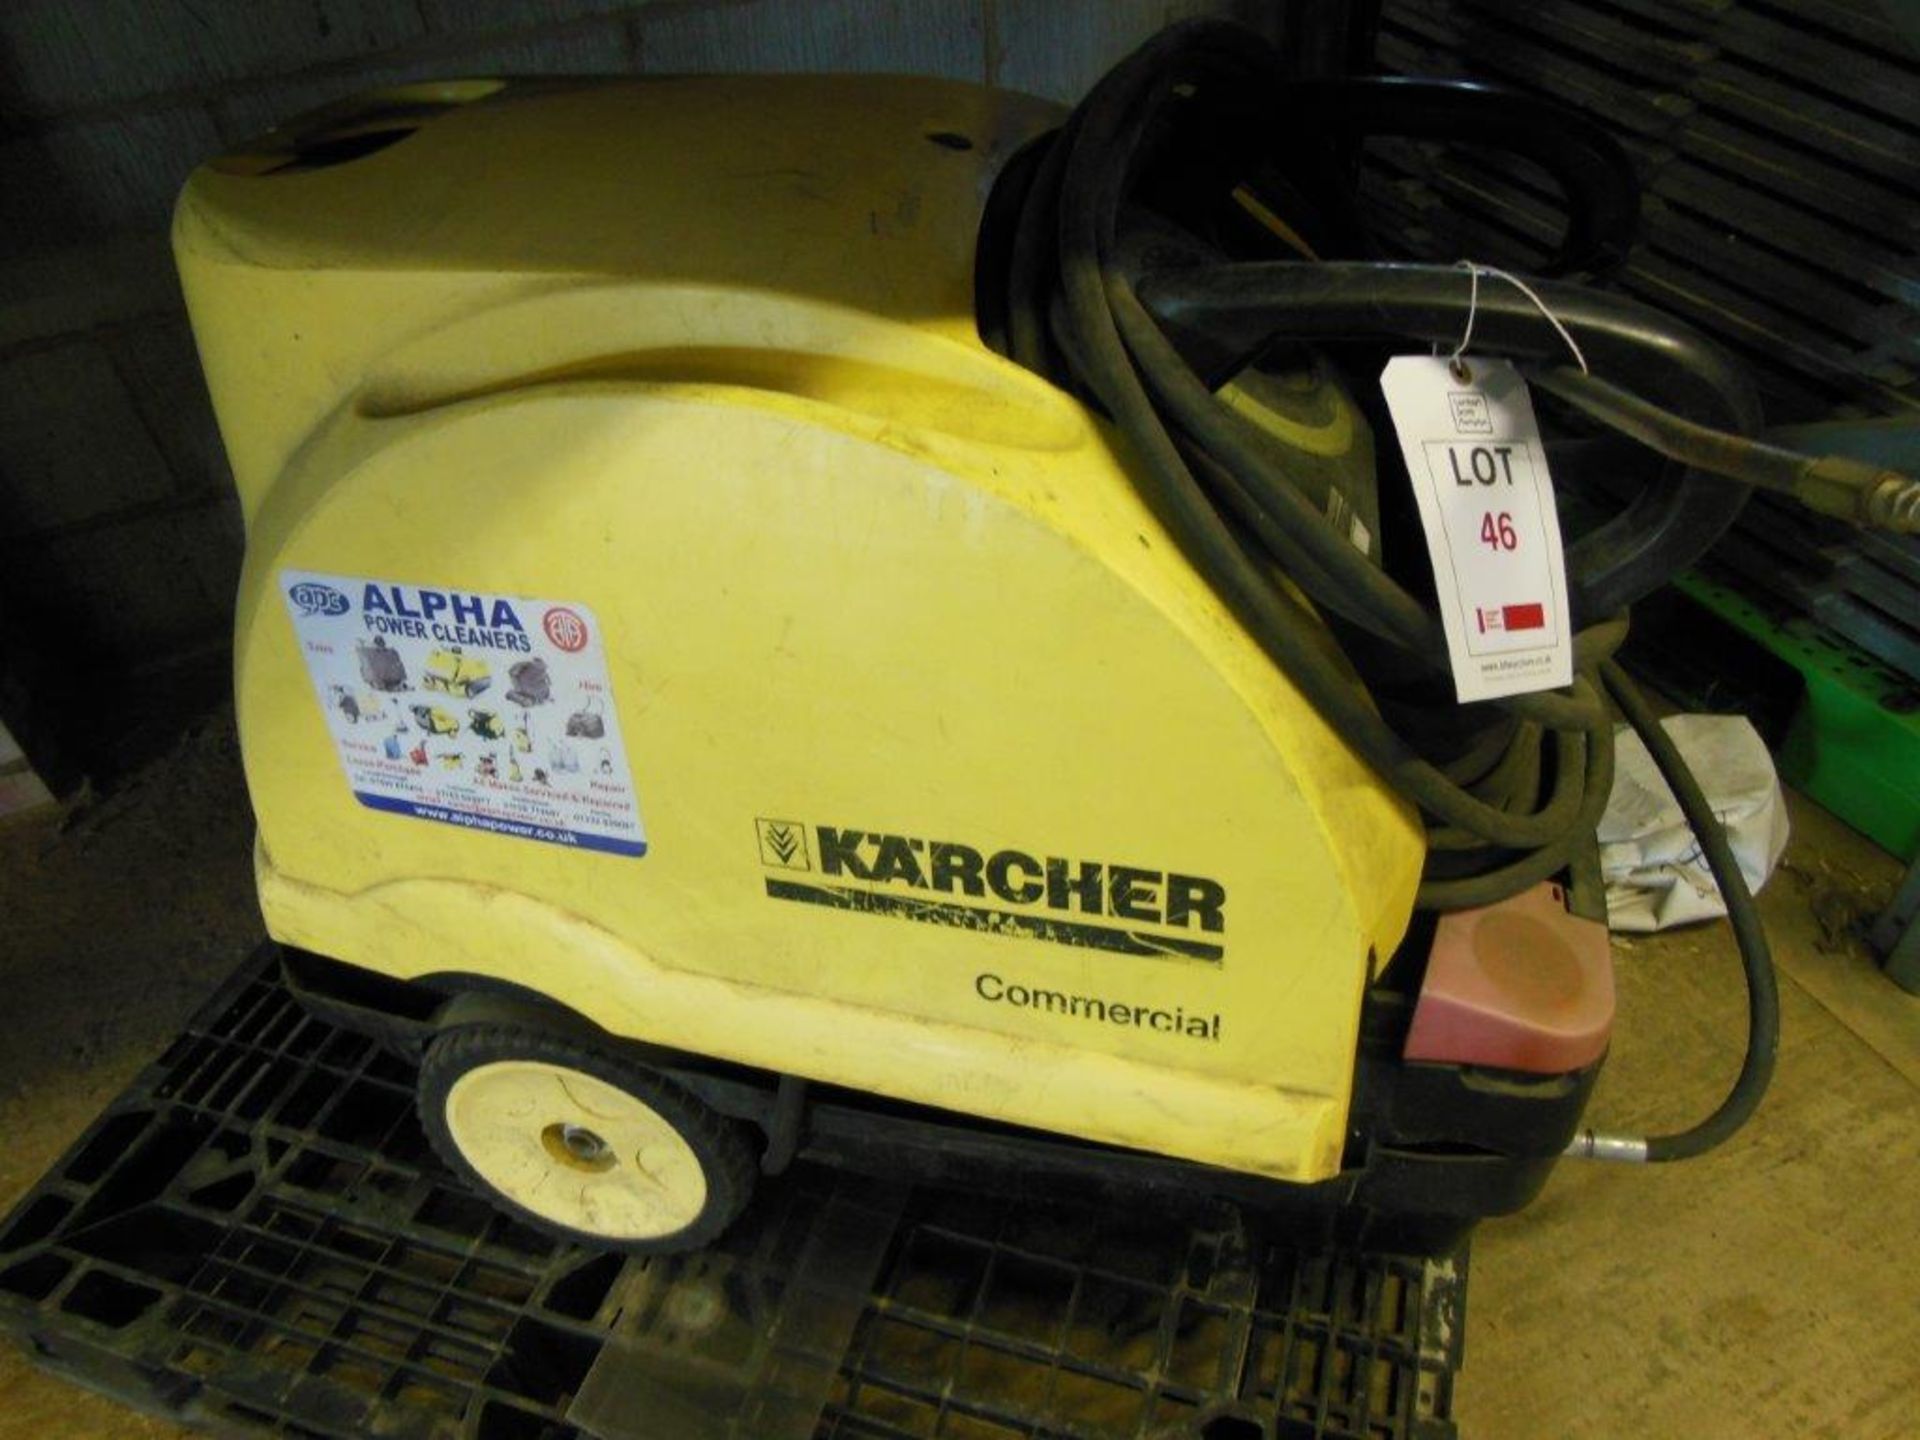 Karcher HDS601C Eco diesel powered steam cleaner complete with lance